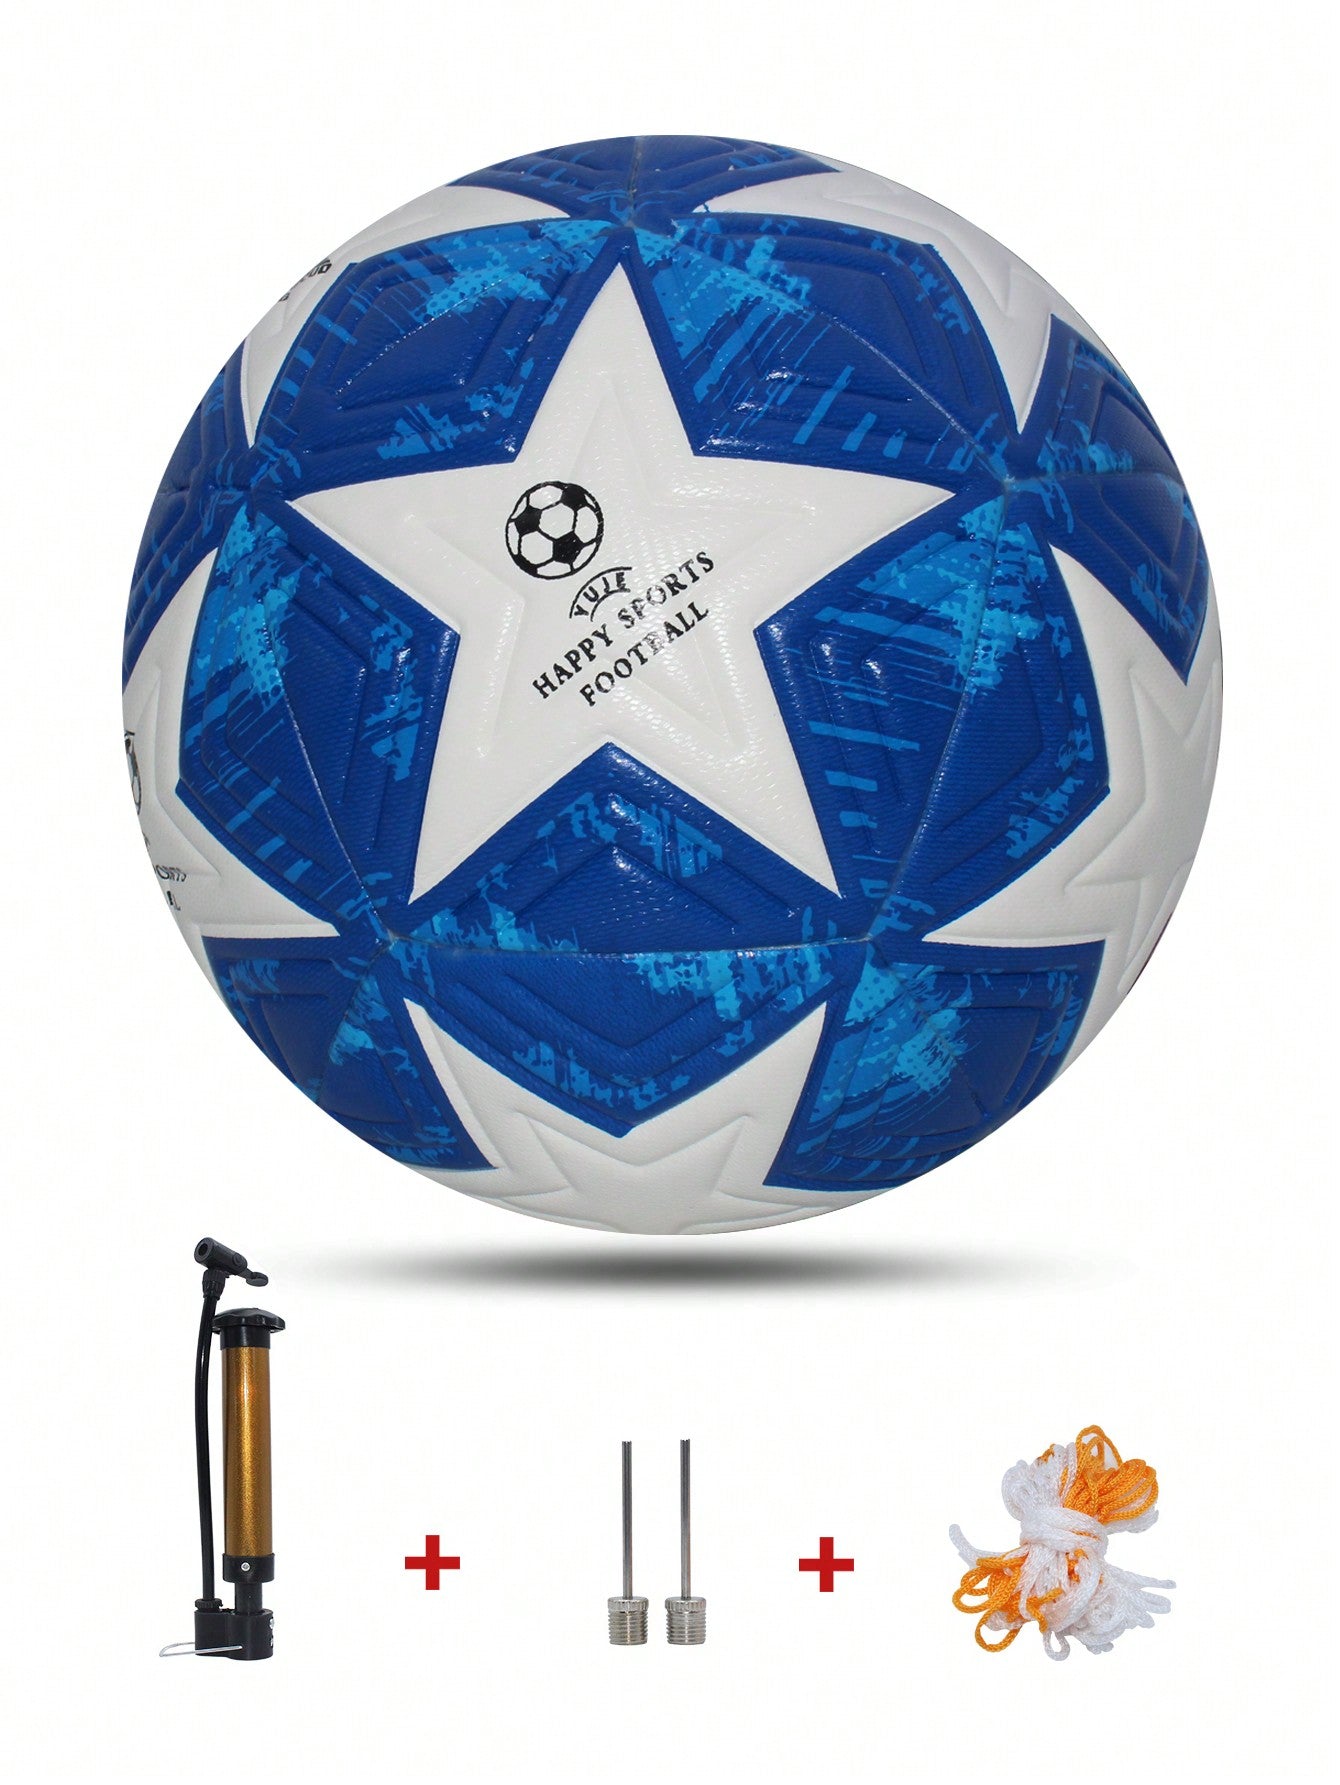 Size 5 Standard Soccer Ball Inflatable Pu Leather, Comes with Free Air Pump/Needle/Net Bag Accessories💜